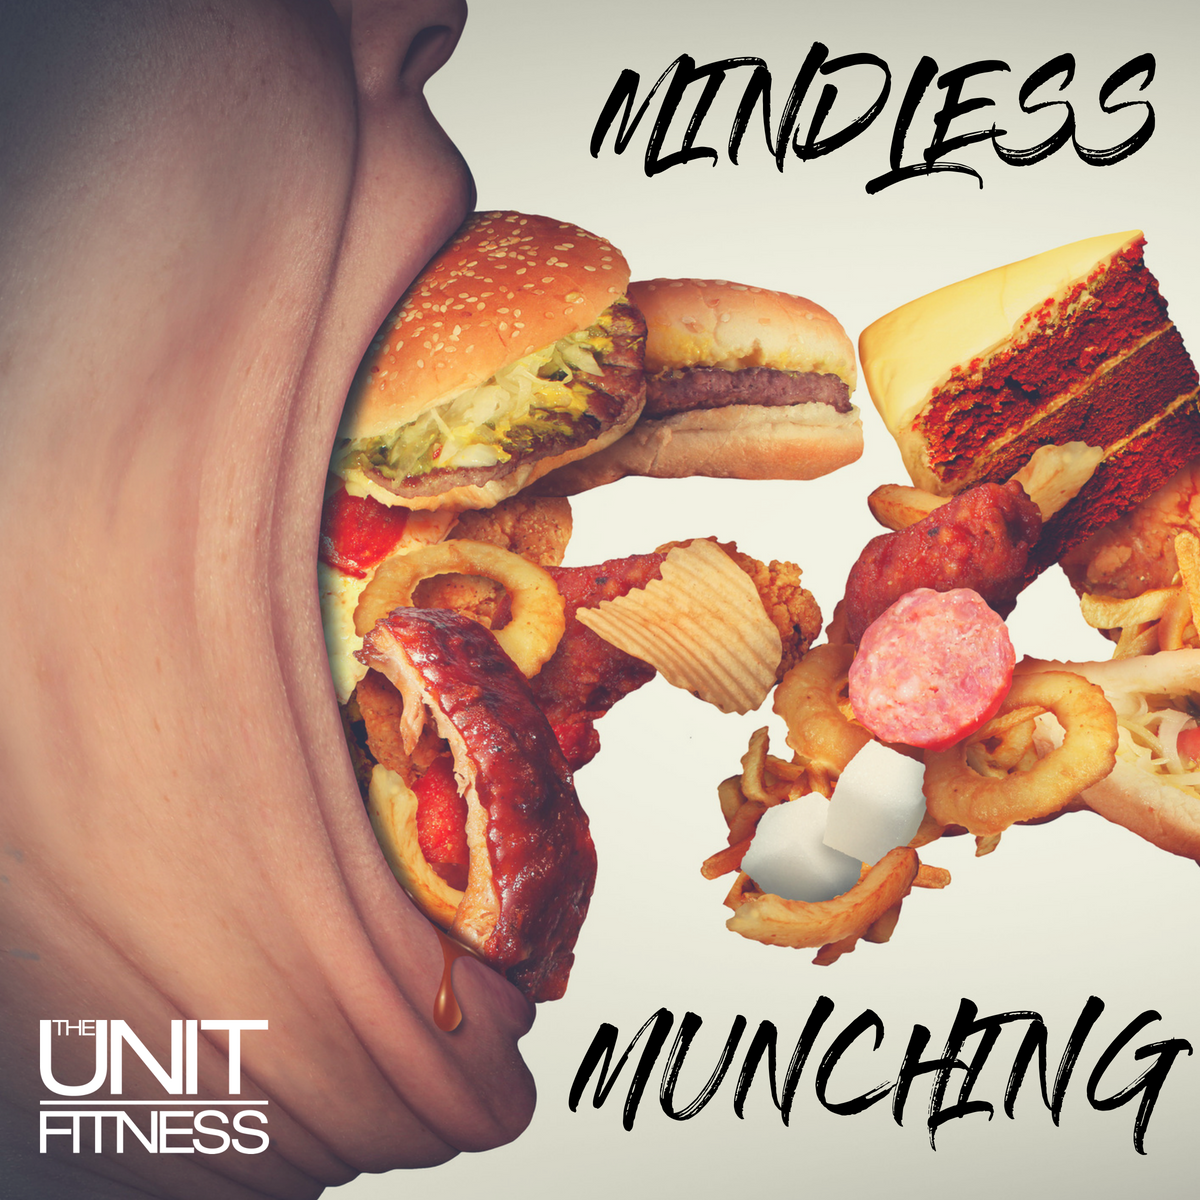 Mindless Munching - part of everyday life? — The Unit Fitness Cambs